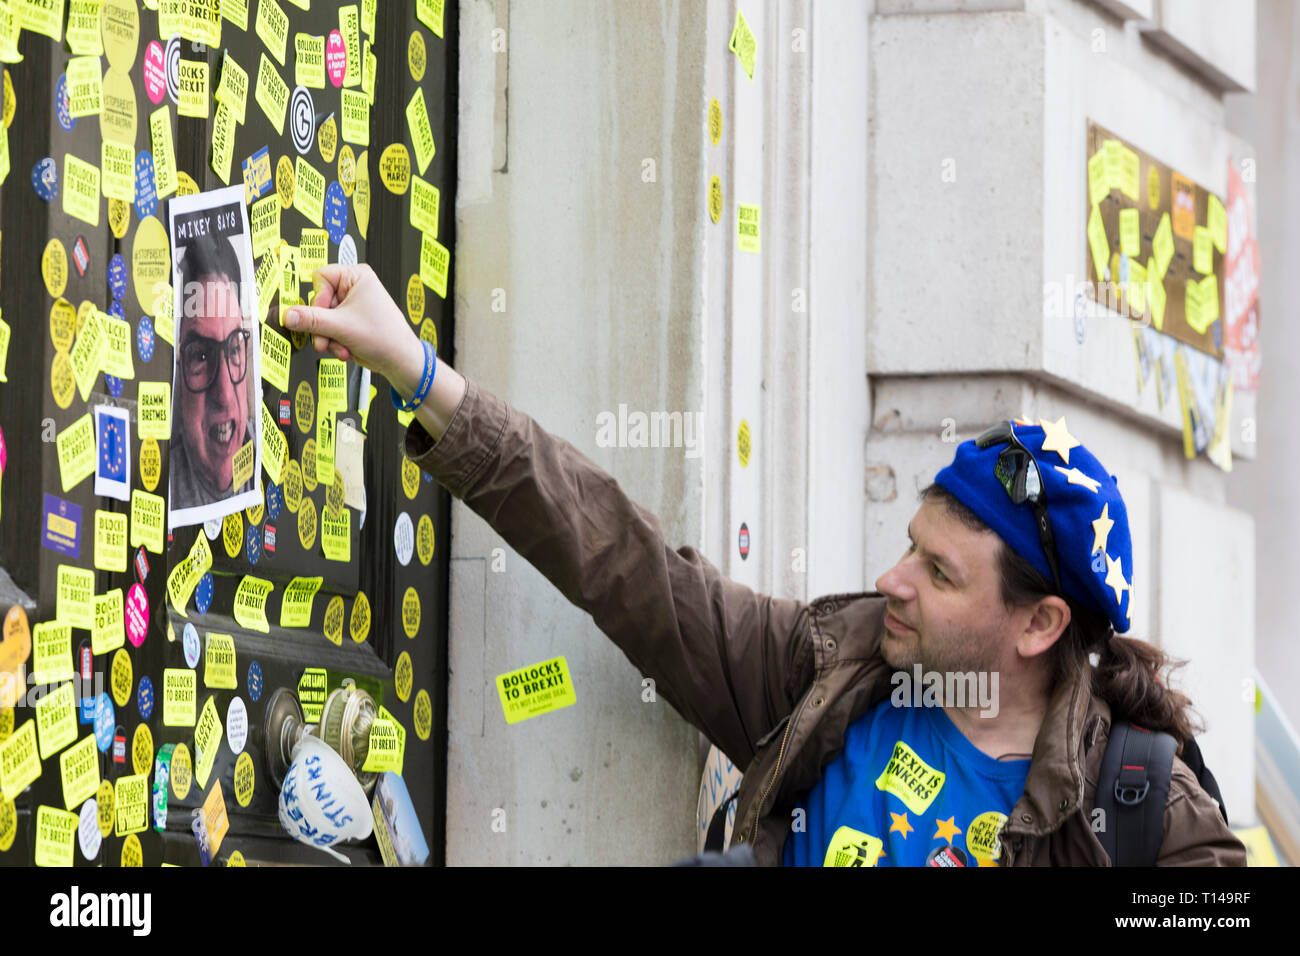 London, UK. 23rd March, 2019. The Government Cabinet Office covered in Anti Brexit stickers at the Anti Brexit people's vote march Credit: Ink Drop/Alamy Live News Stock Photo